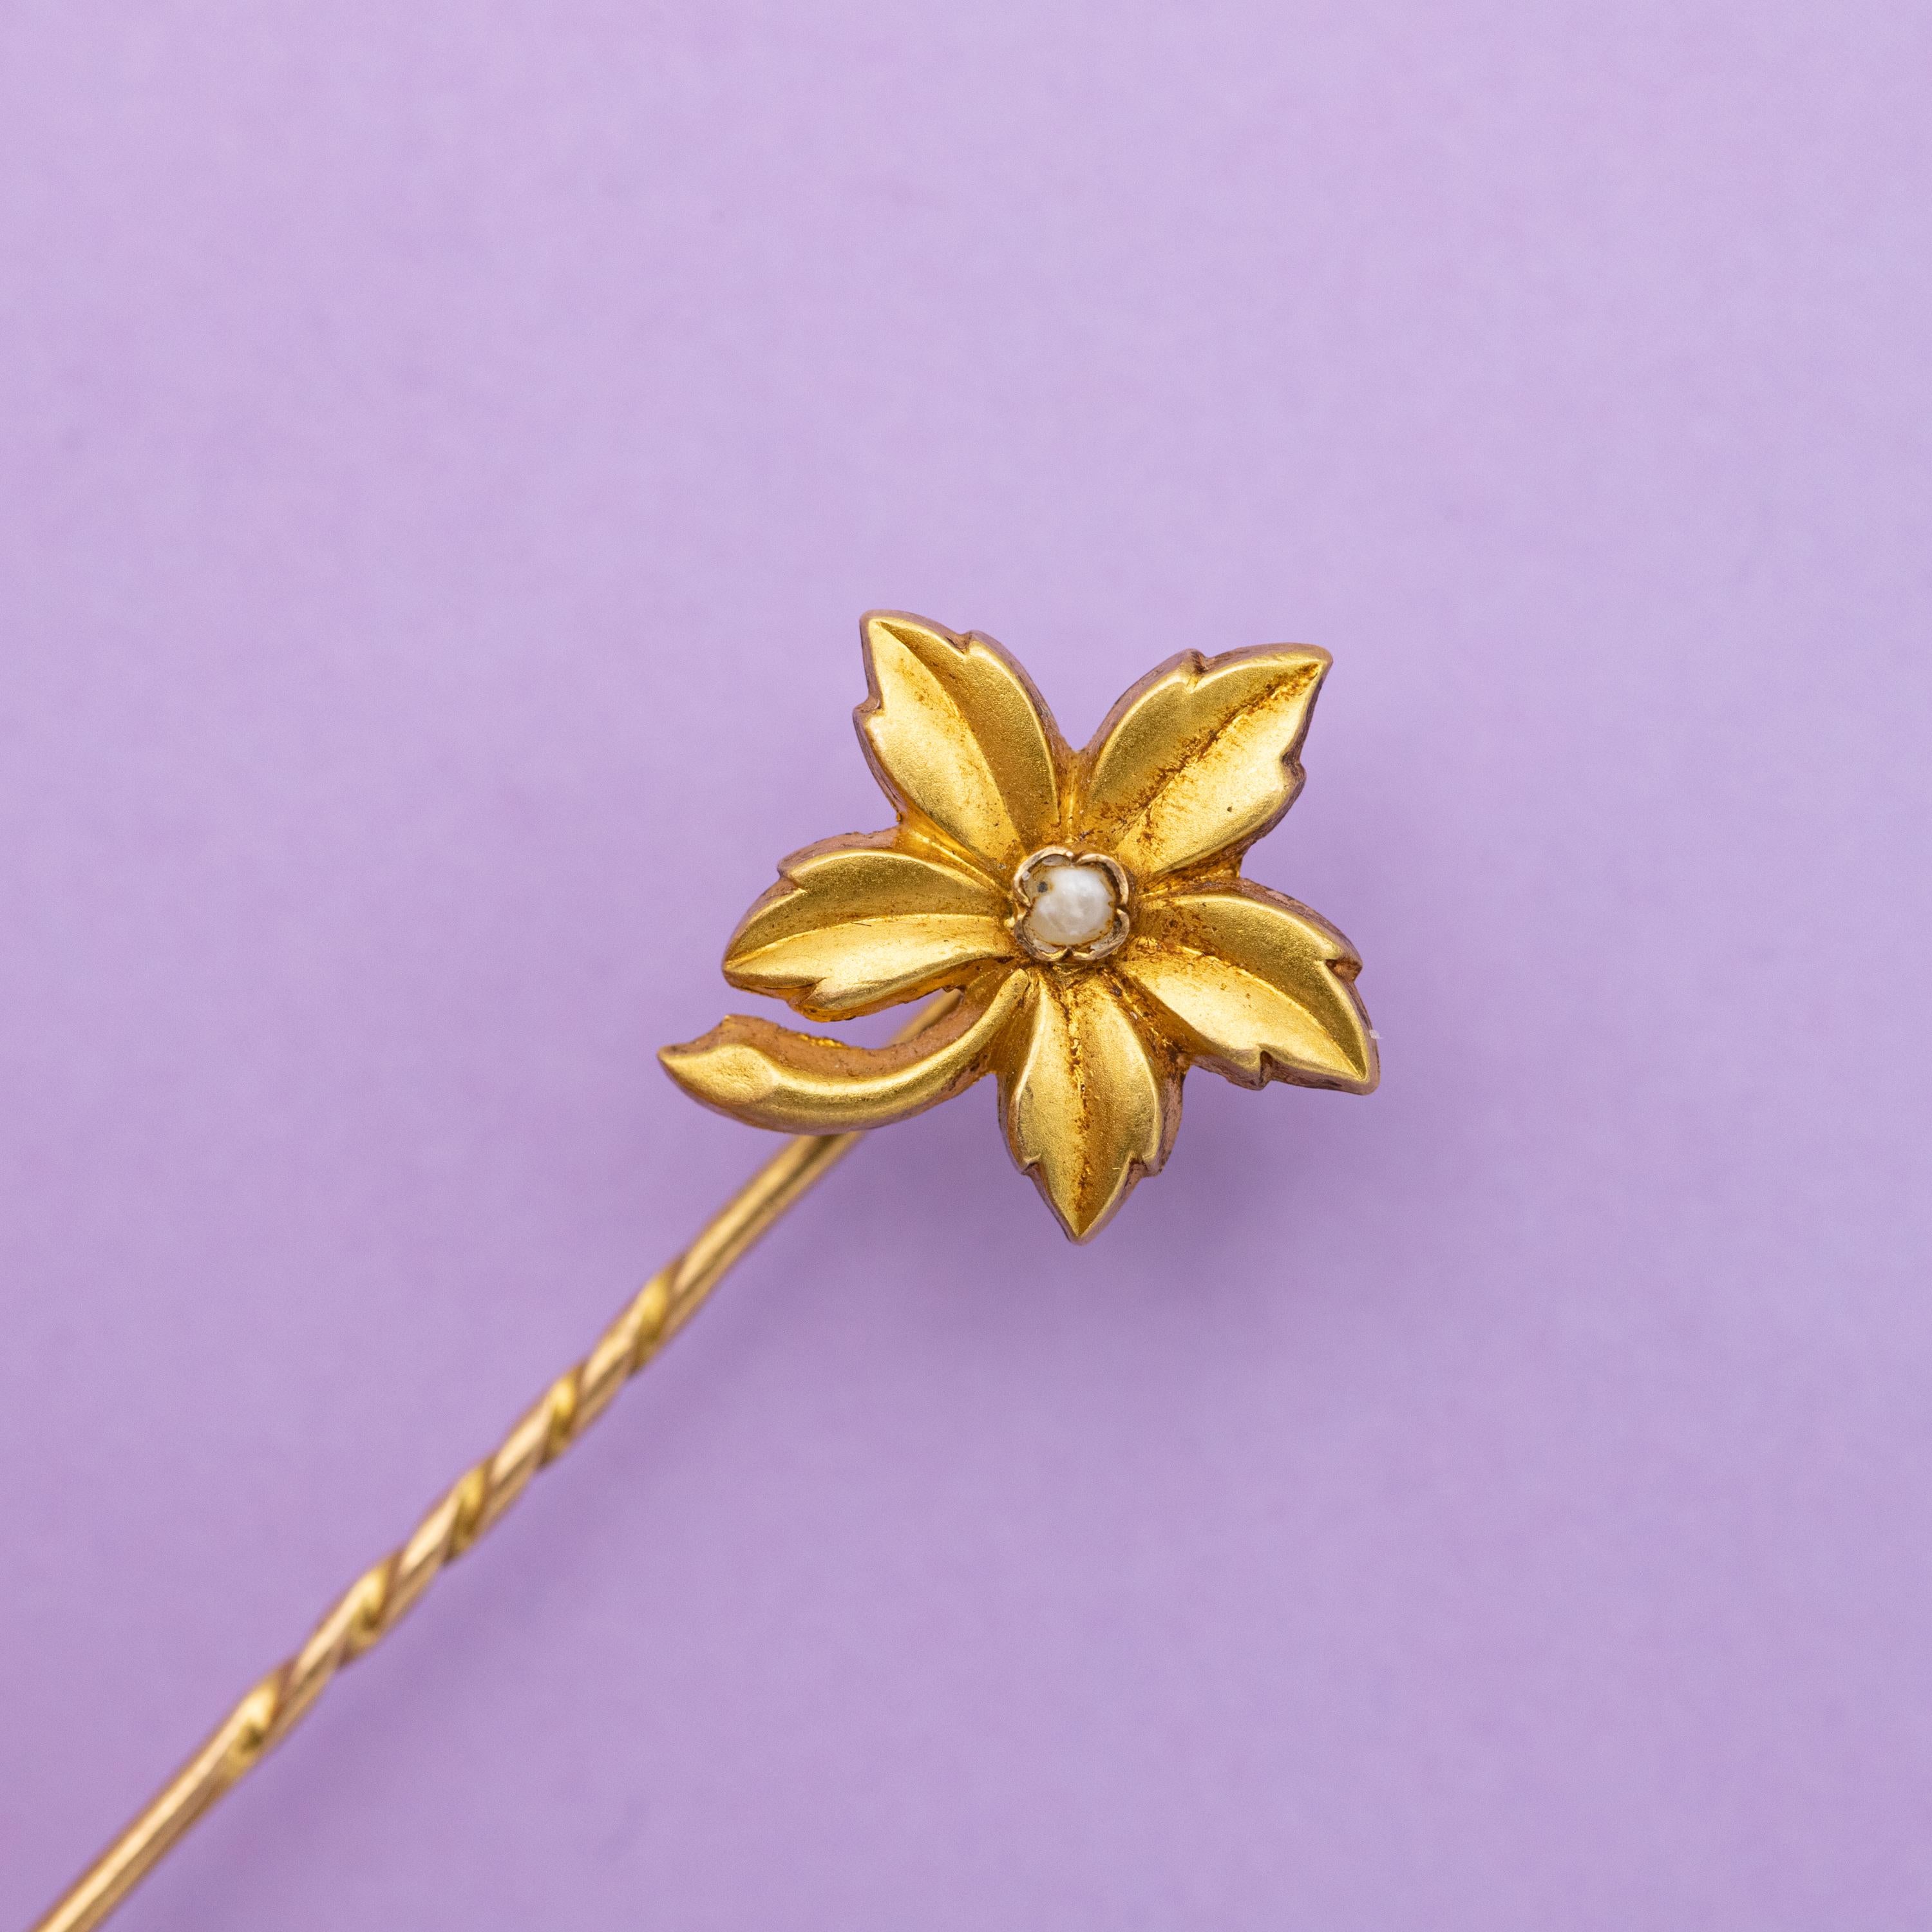 18k Yellow gold stick pin - Family brooch - detailed Ivy cravat pin For Sale 2